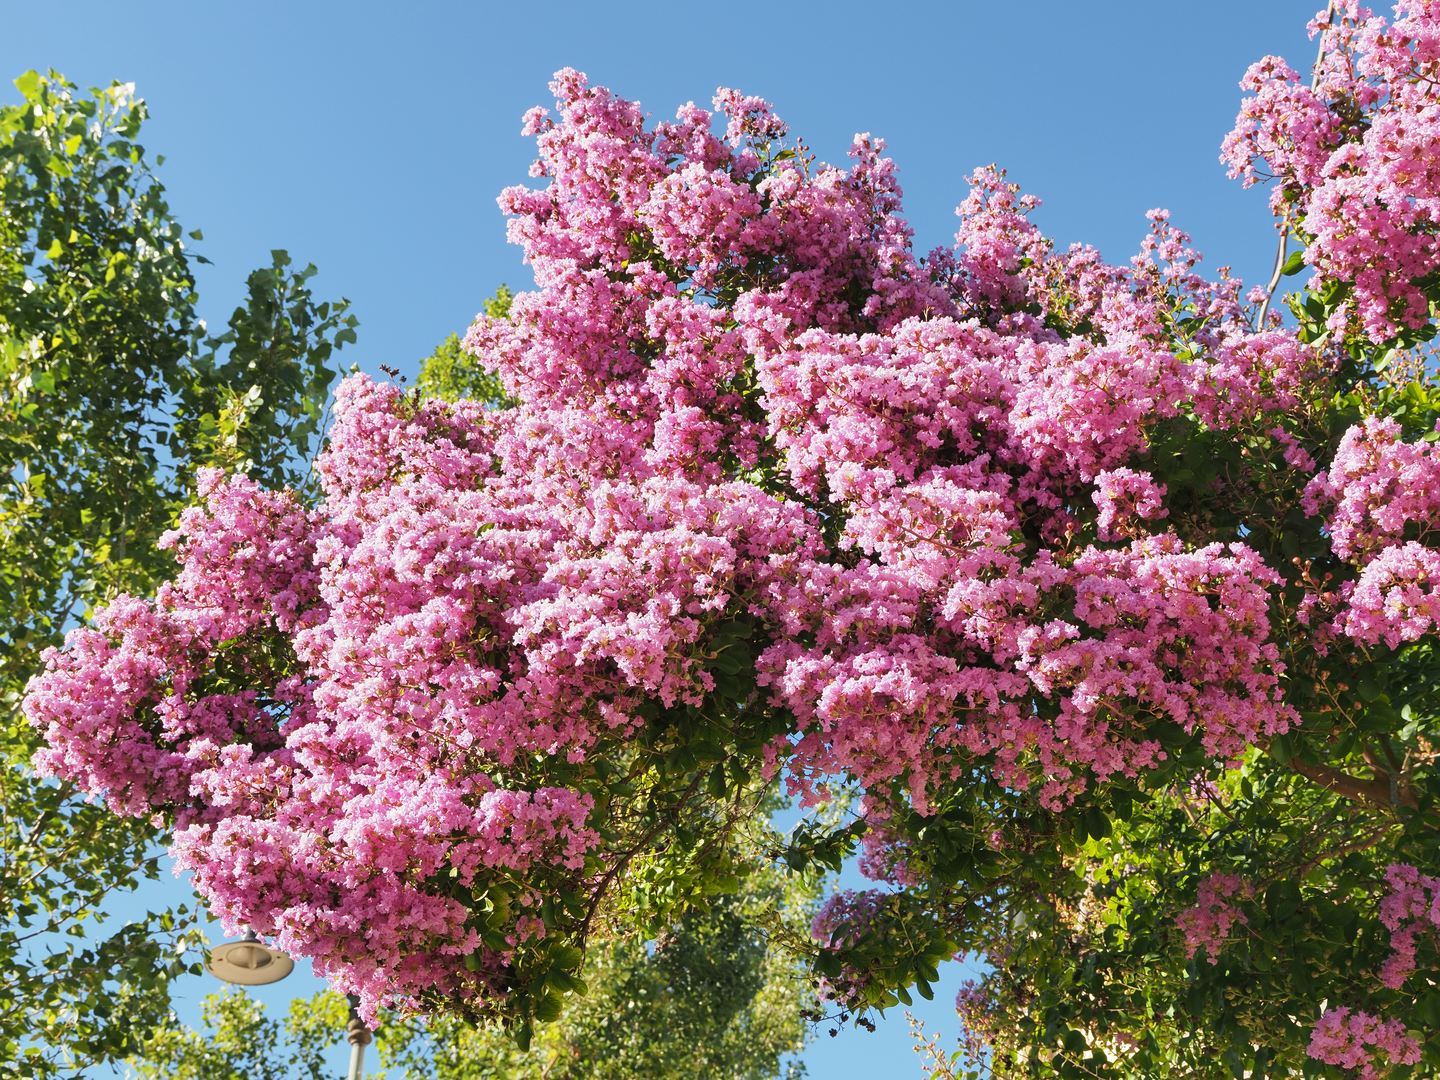 Crape Myrtle Pruning 101 - Why, When & How